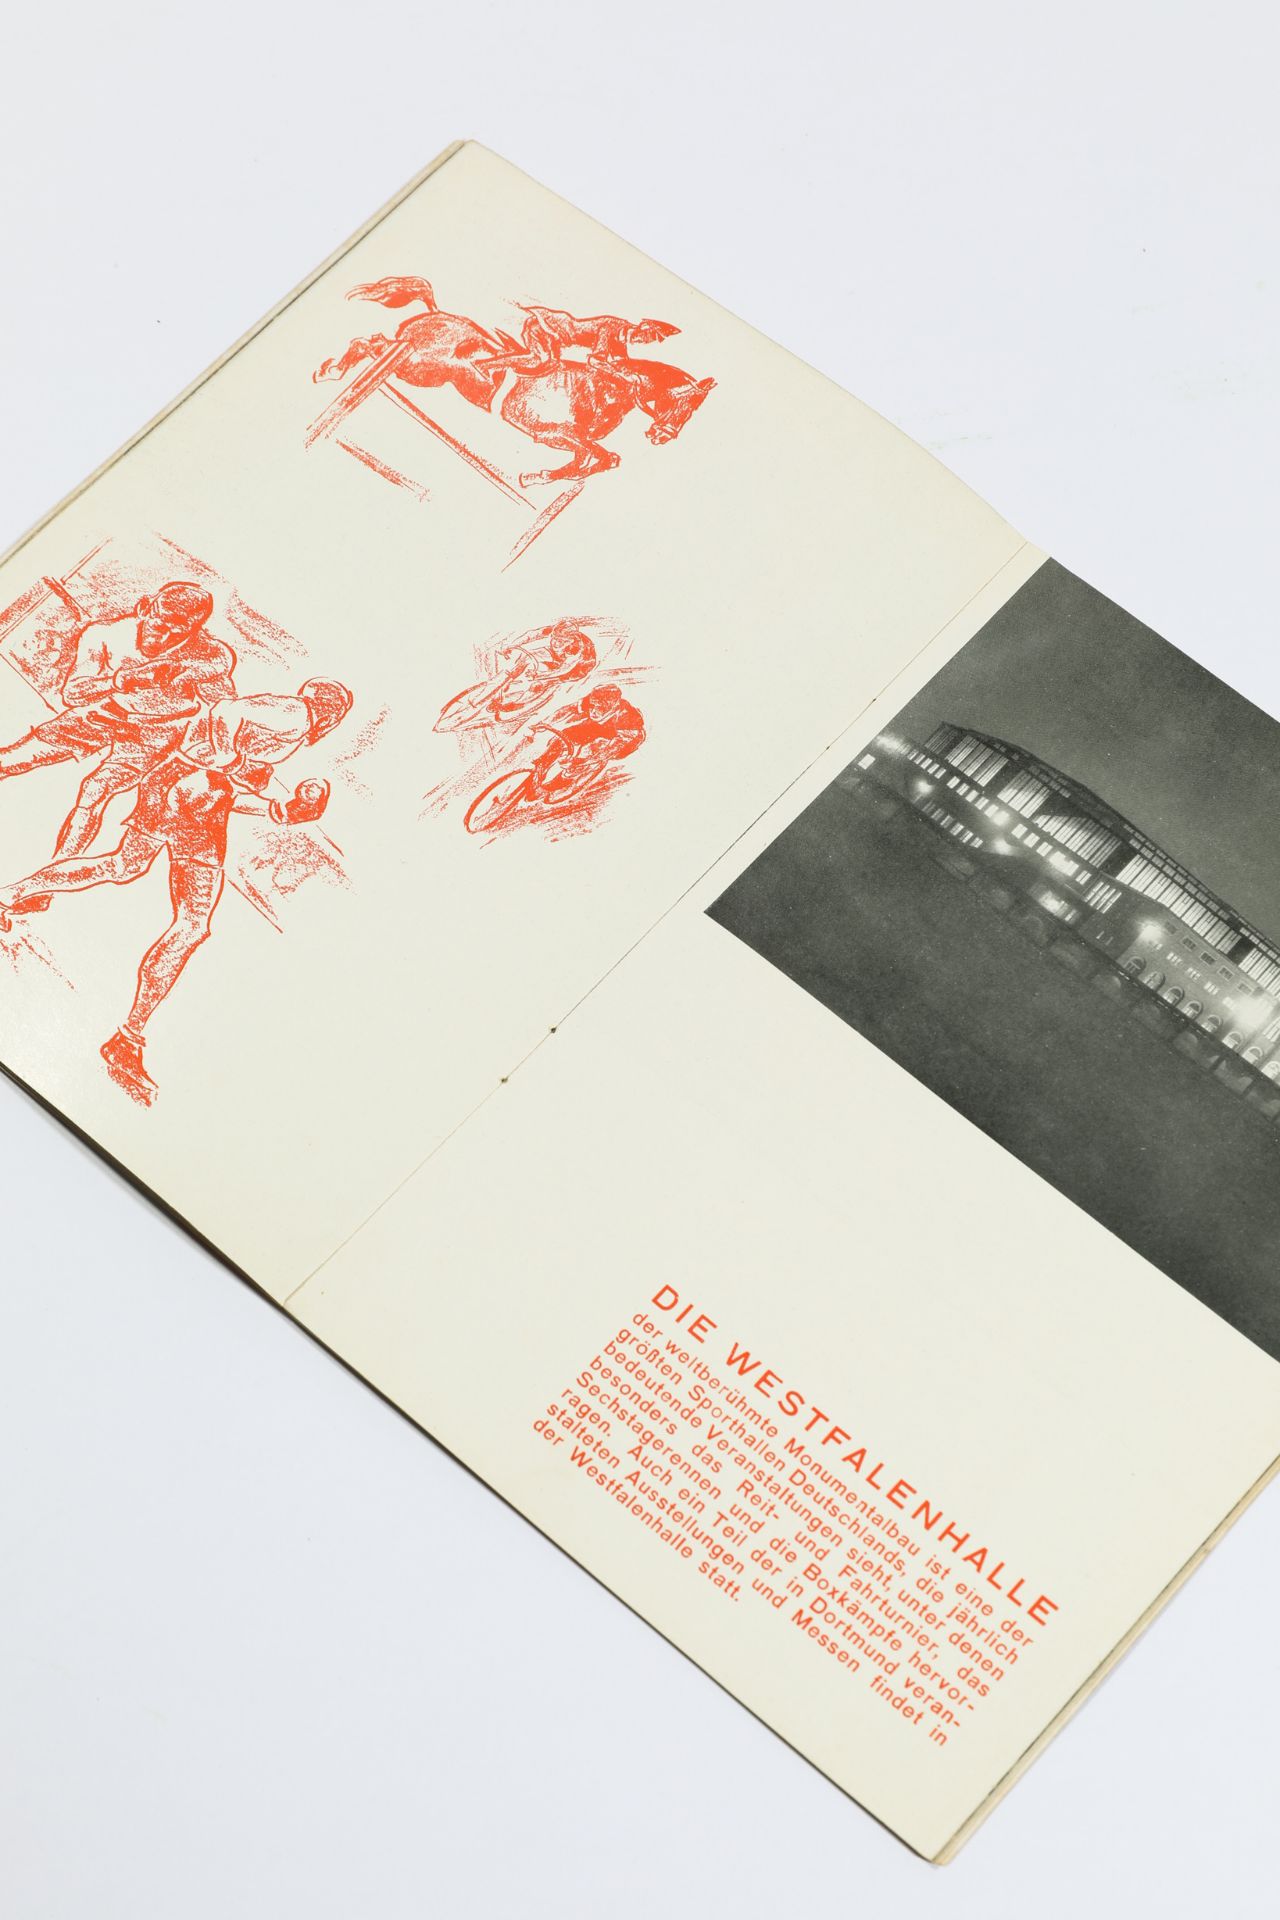 Max Burchartz, 6 Books/ Typographies after his designs - Image 8 of 21